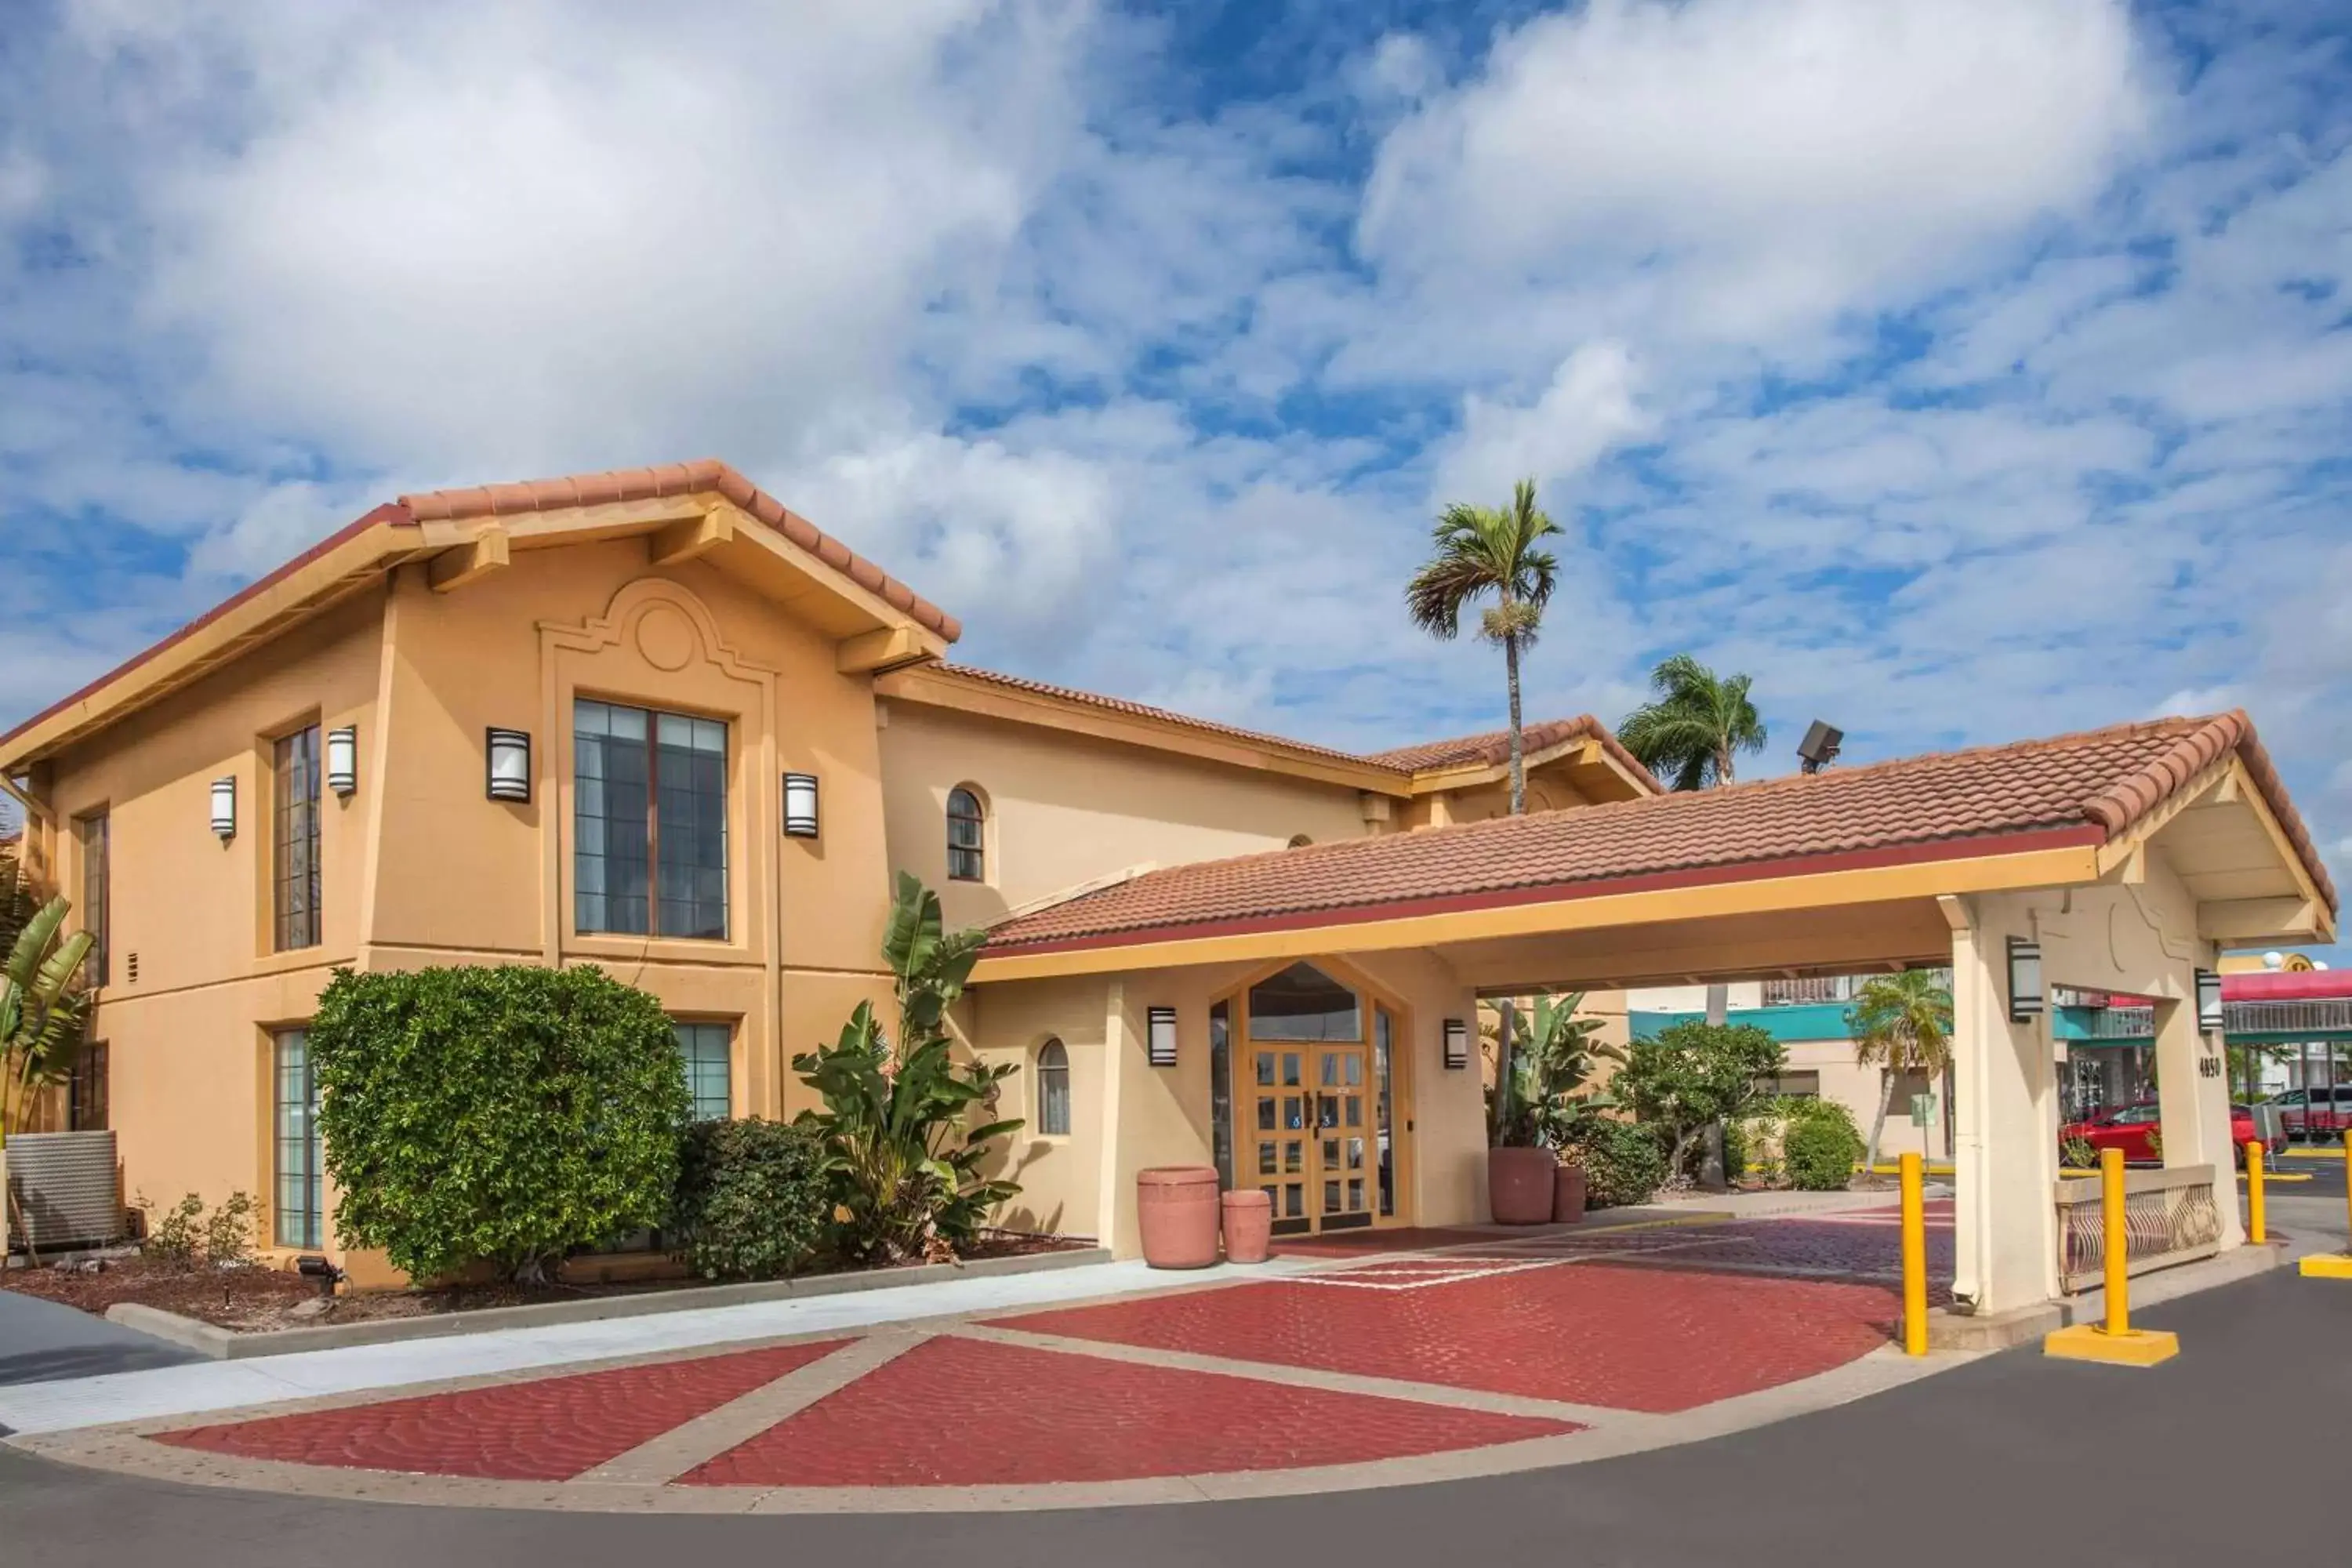 Property Building in La Quinta Inn by Wyndham Fort Myers Central